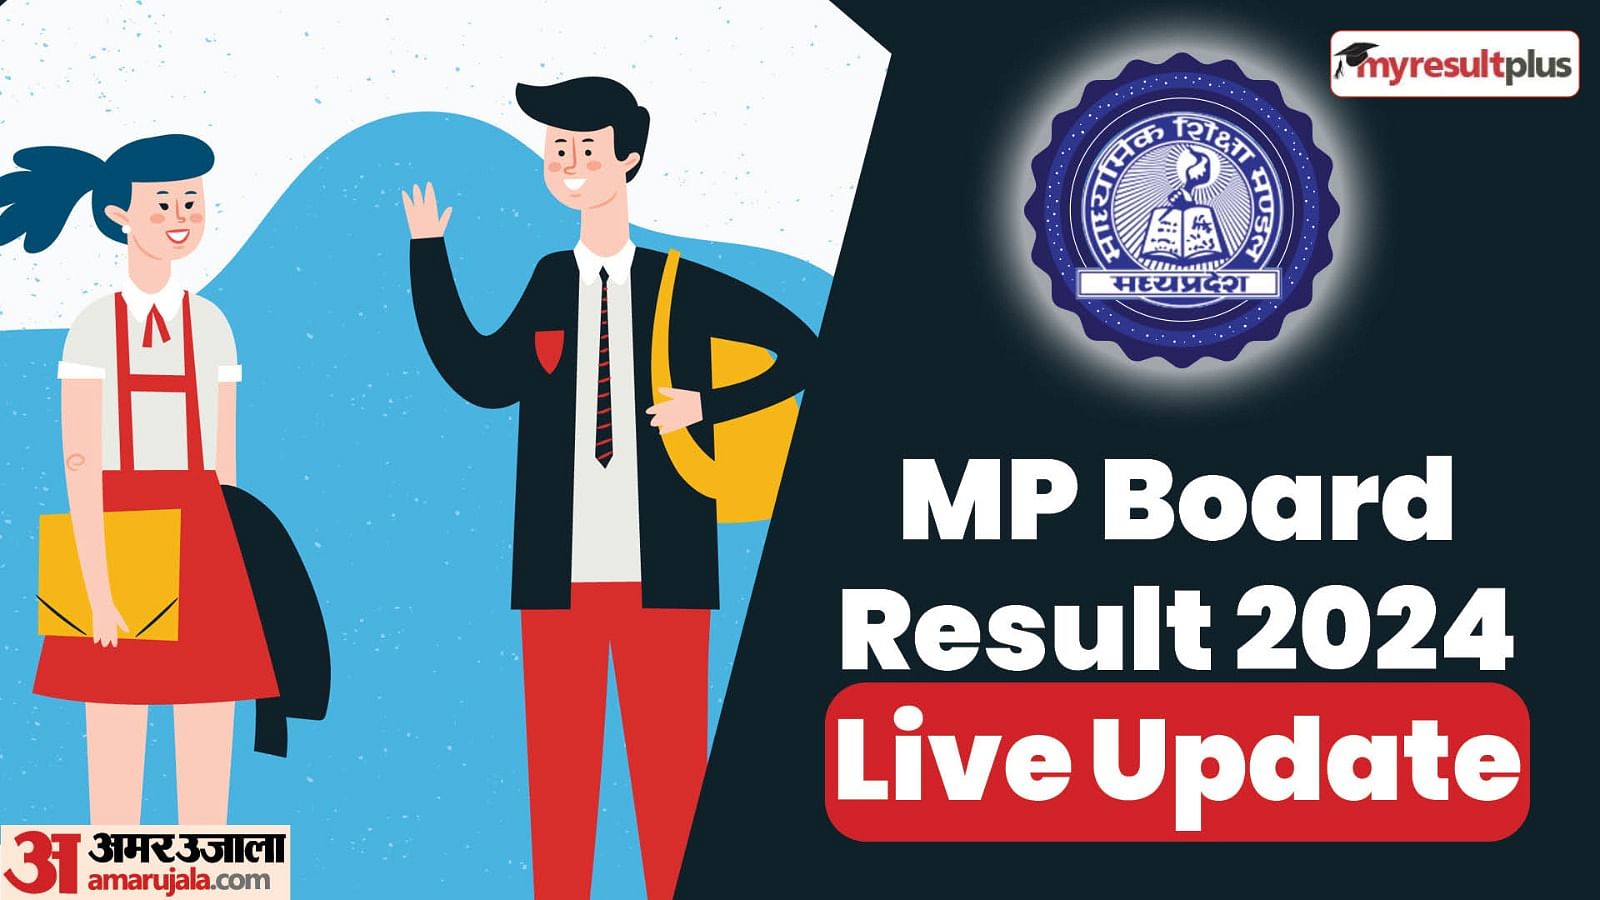 MP Board Result 2024 Live: MPBSE to release the 10th, 12th Board Results Soon, Check the updates here